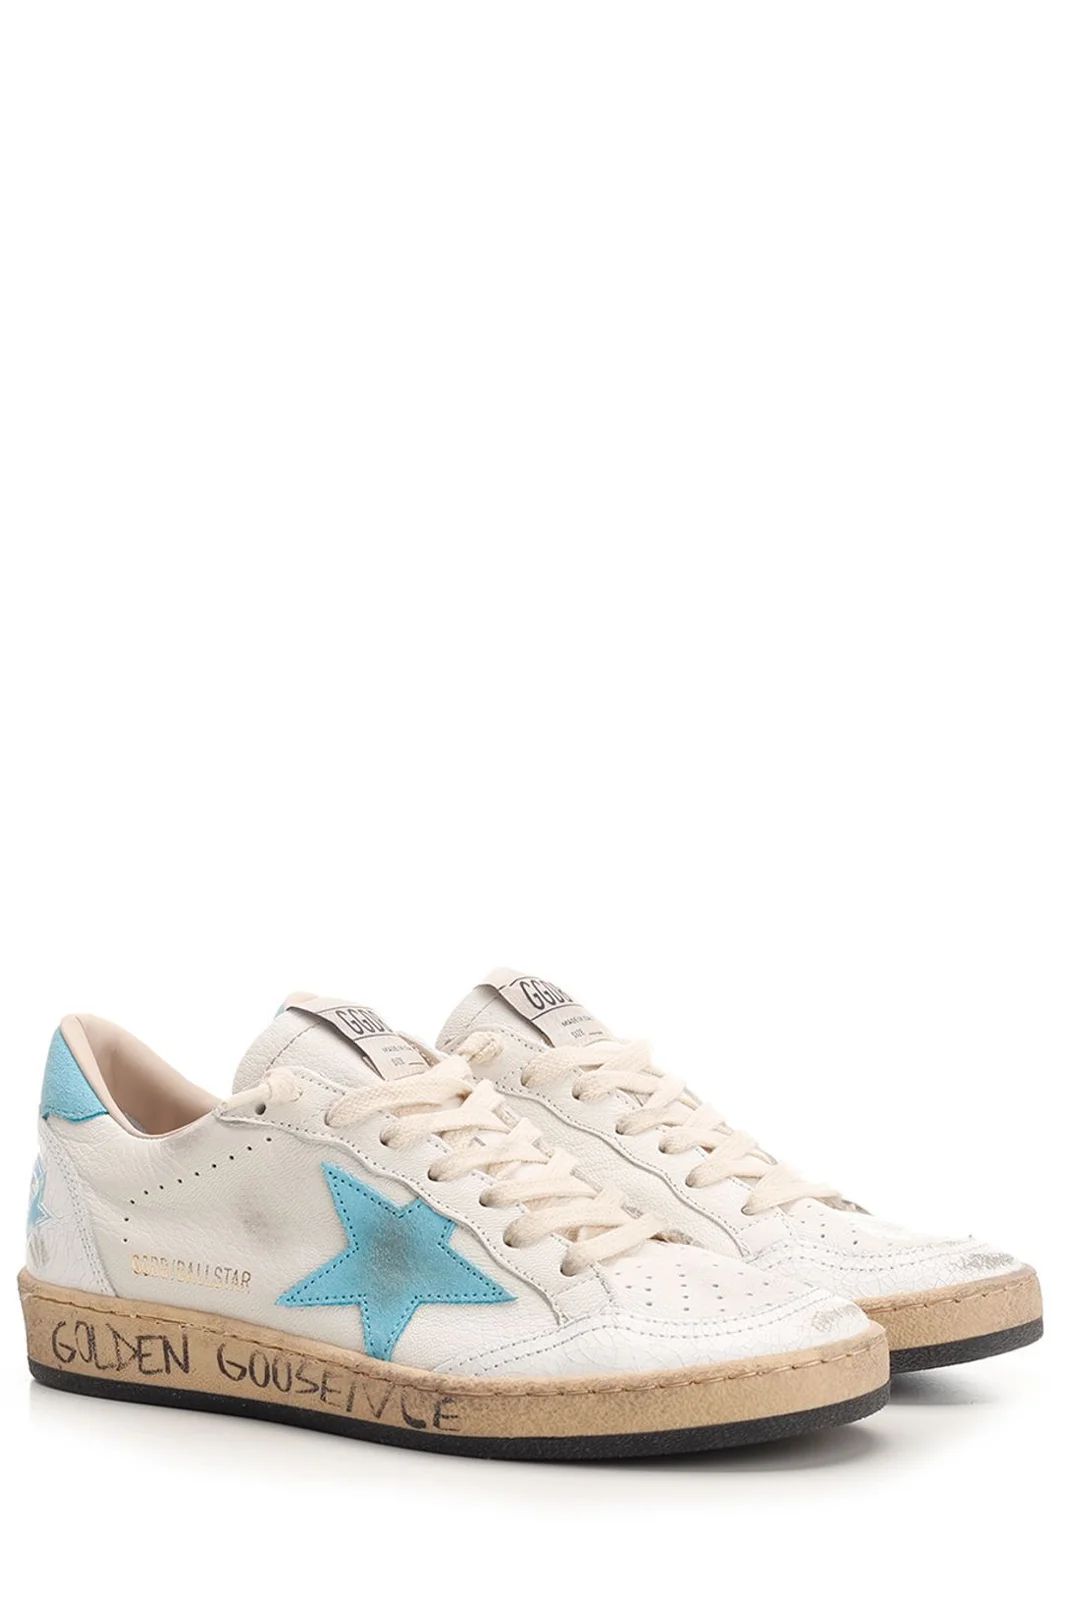 Golden Goose Deluxe Brand Ball Star Lace-Up Distressed Sneakers | Cettire Global